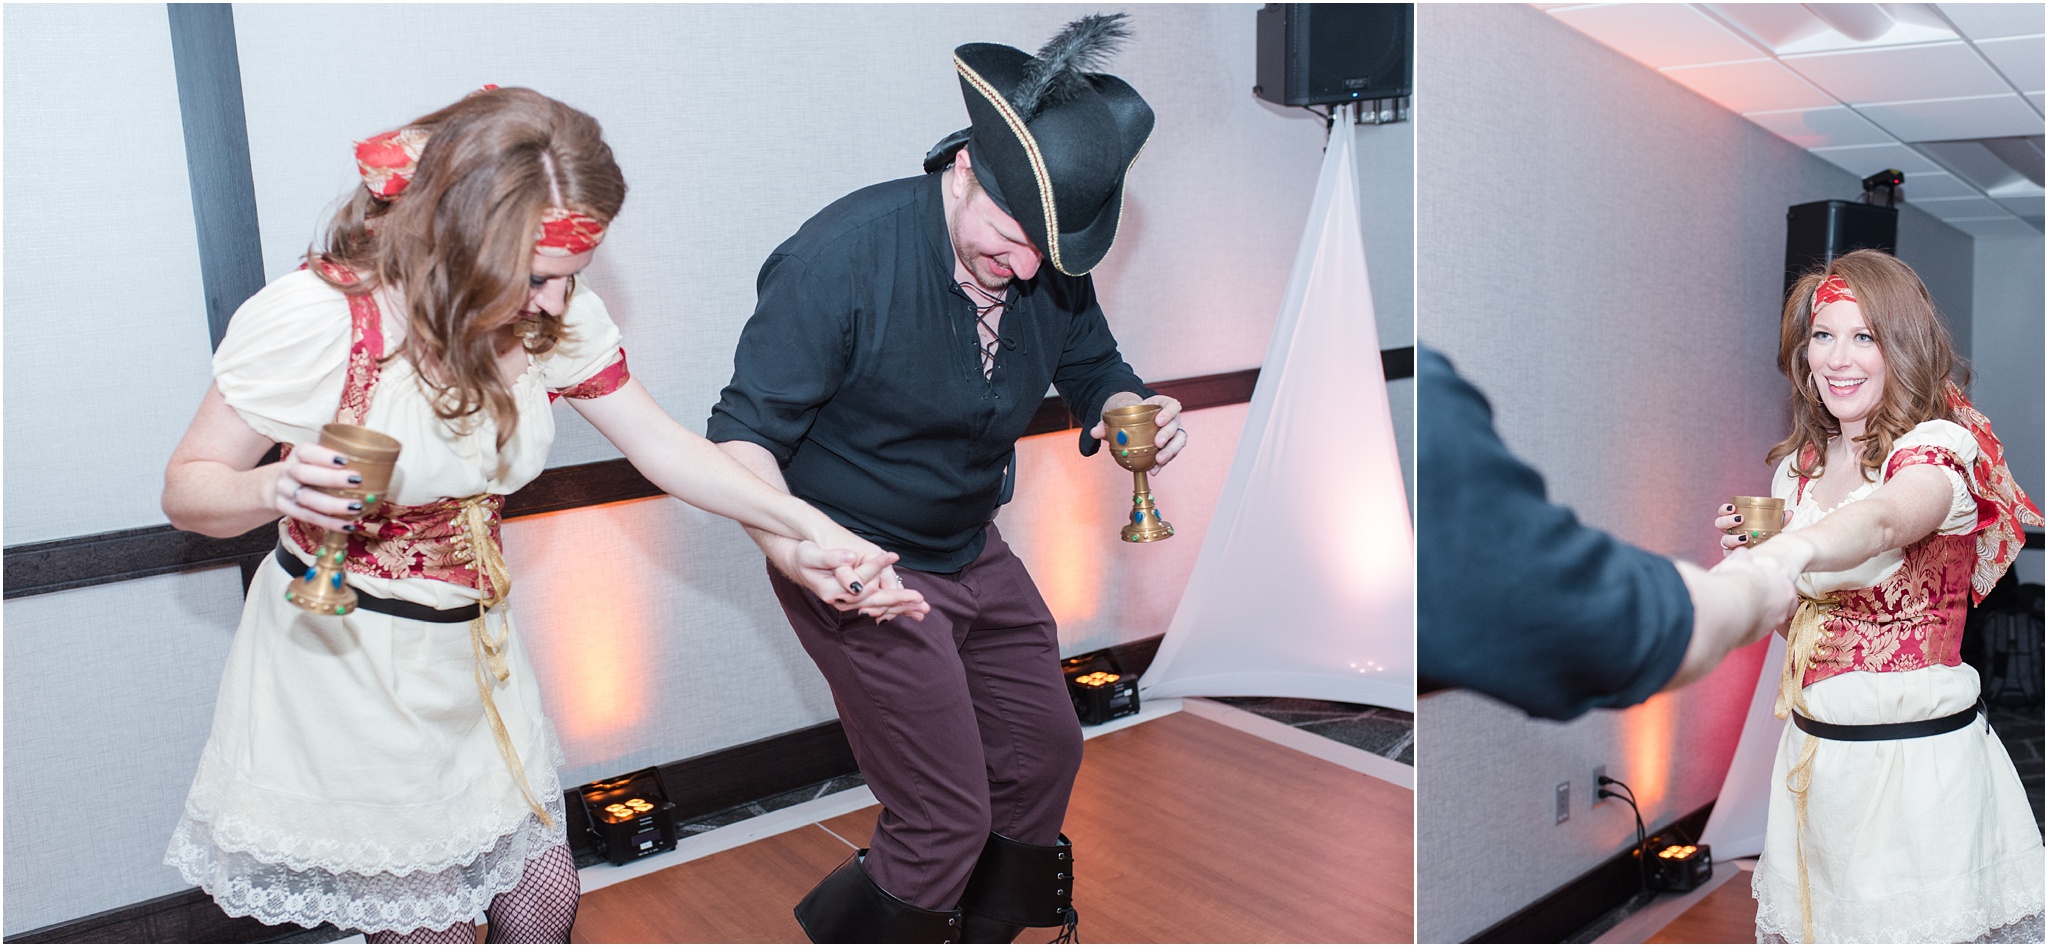 Couple dancing at pirate party 